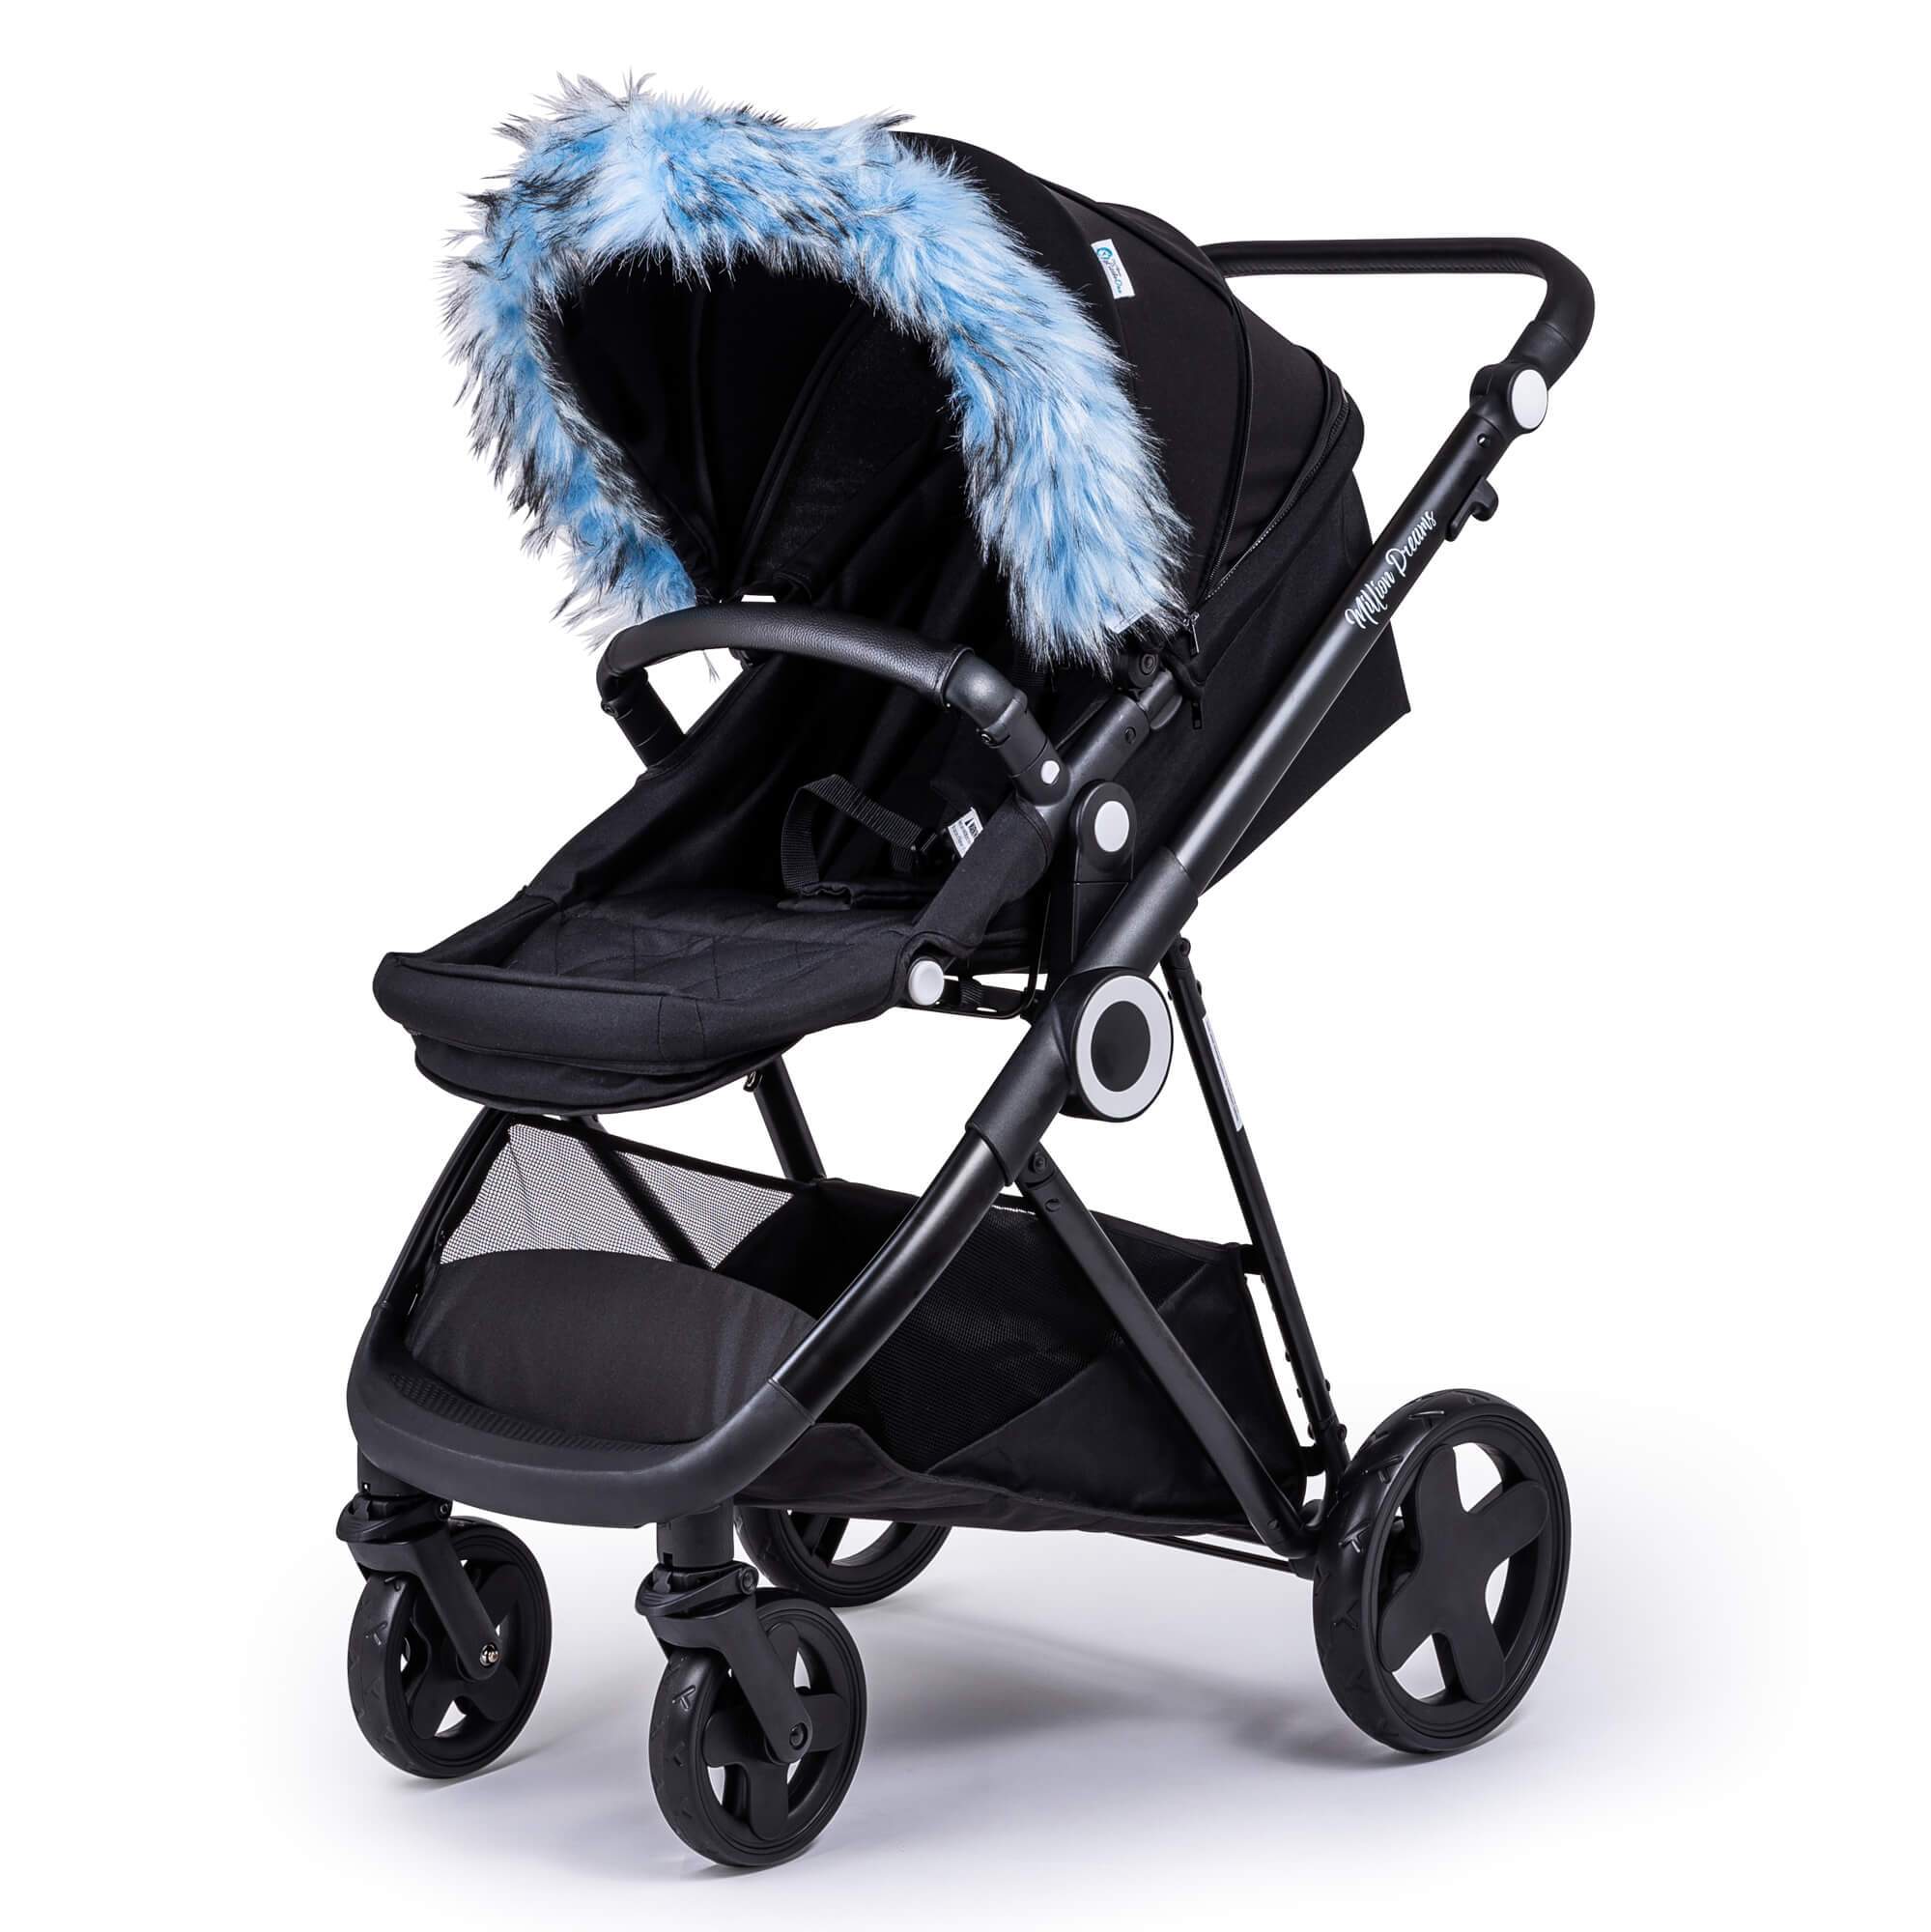 Pram Fur Hood Trim Attachment For Pushchair Compatible with Infababy - Light Blue / Fits All Models | For Your Little One